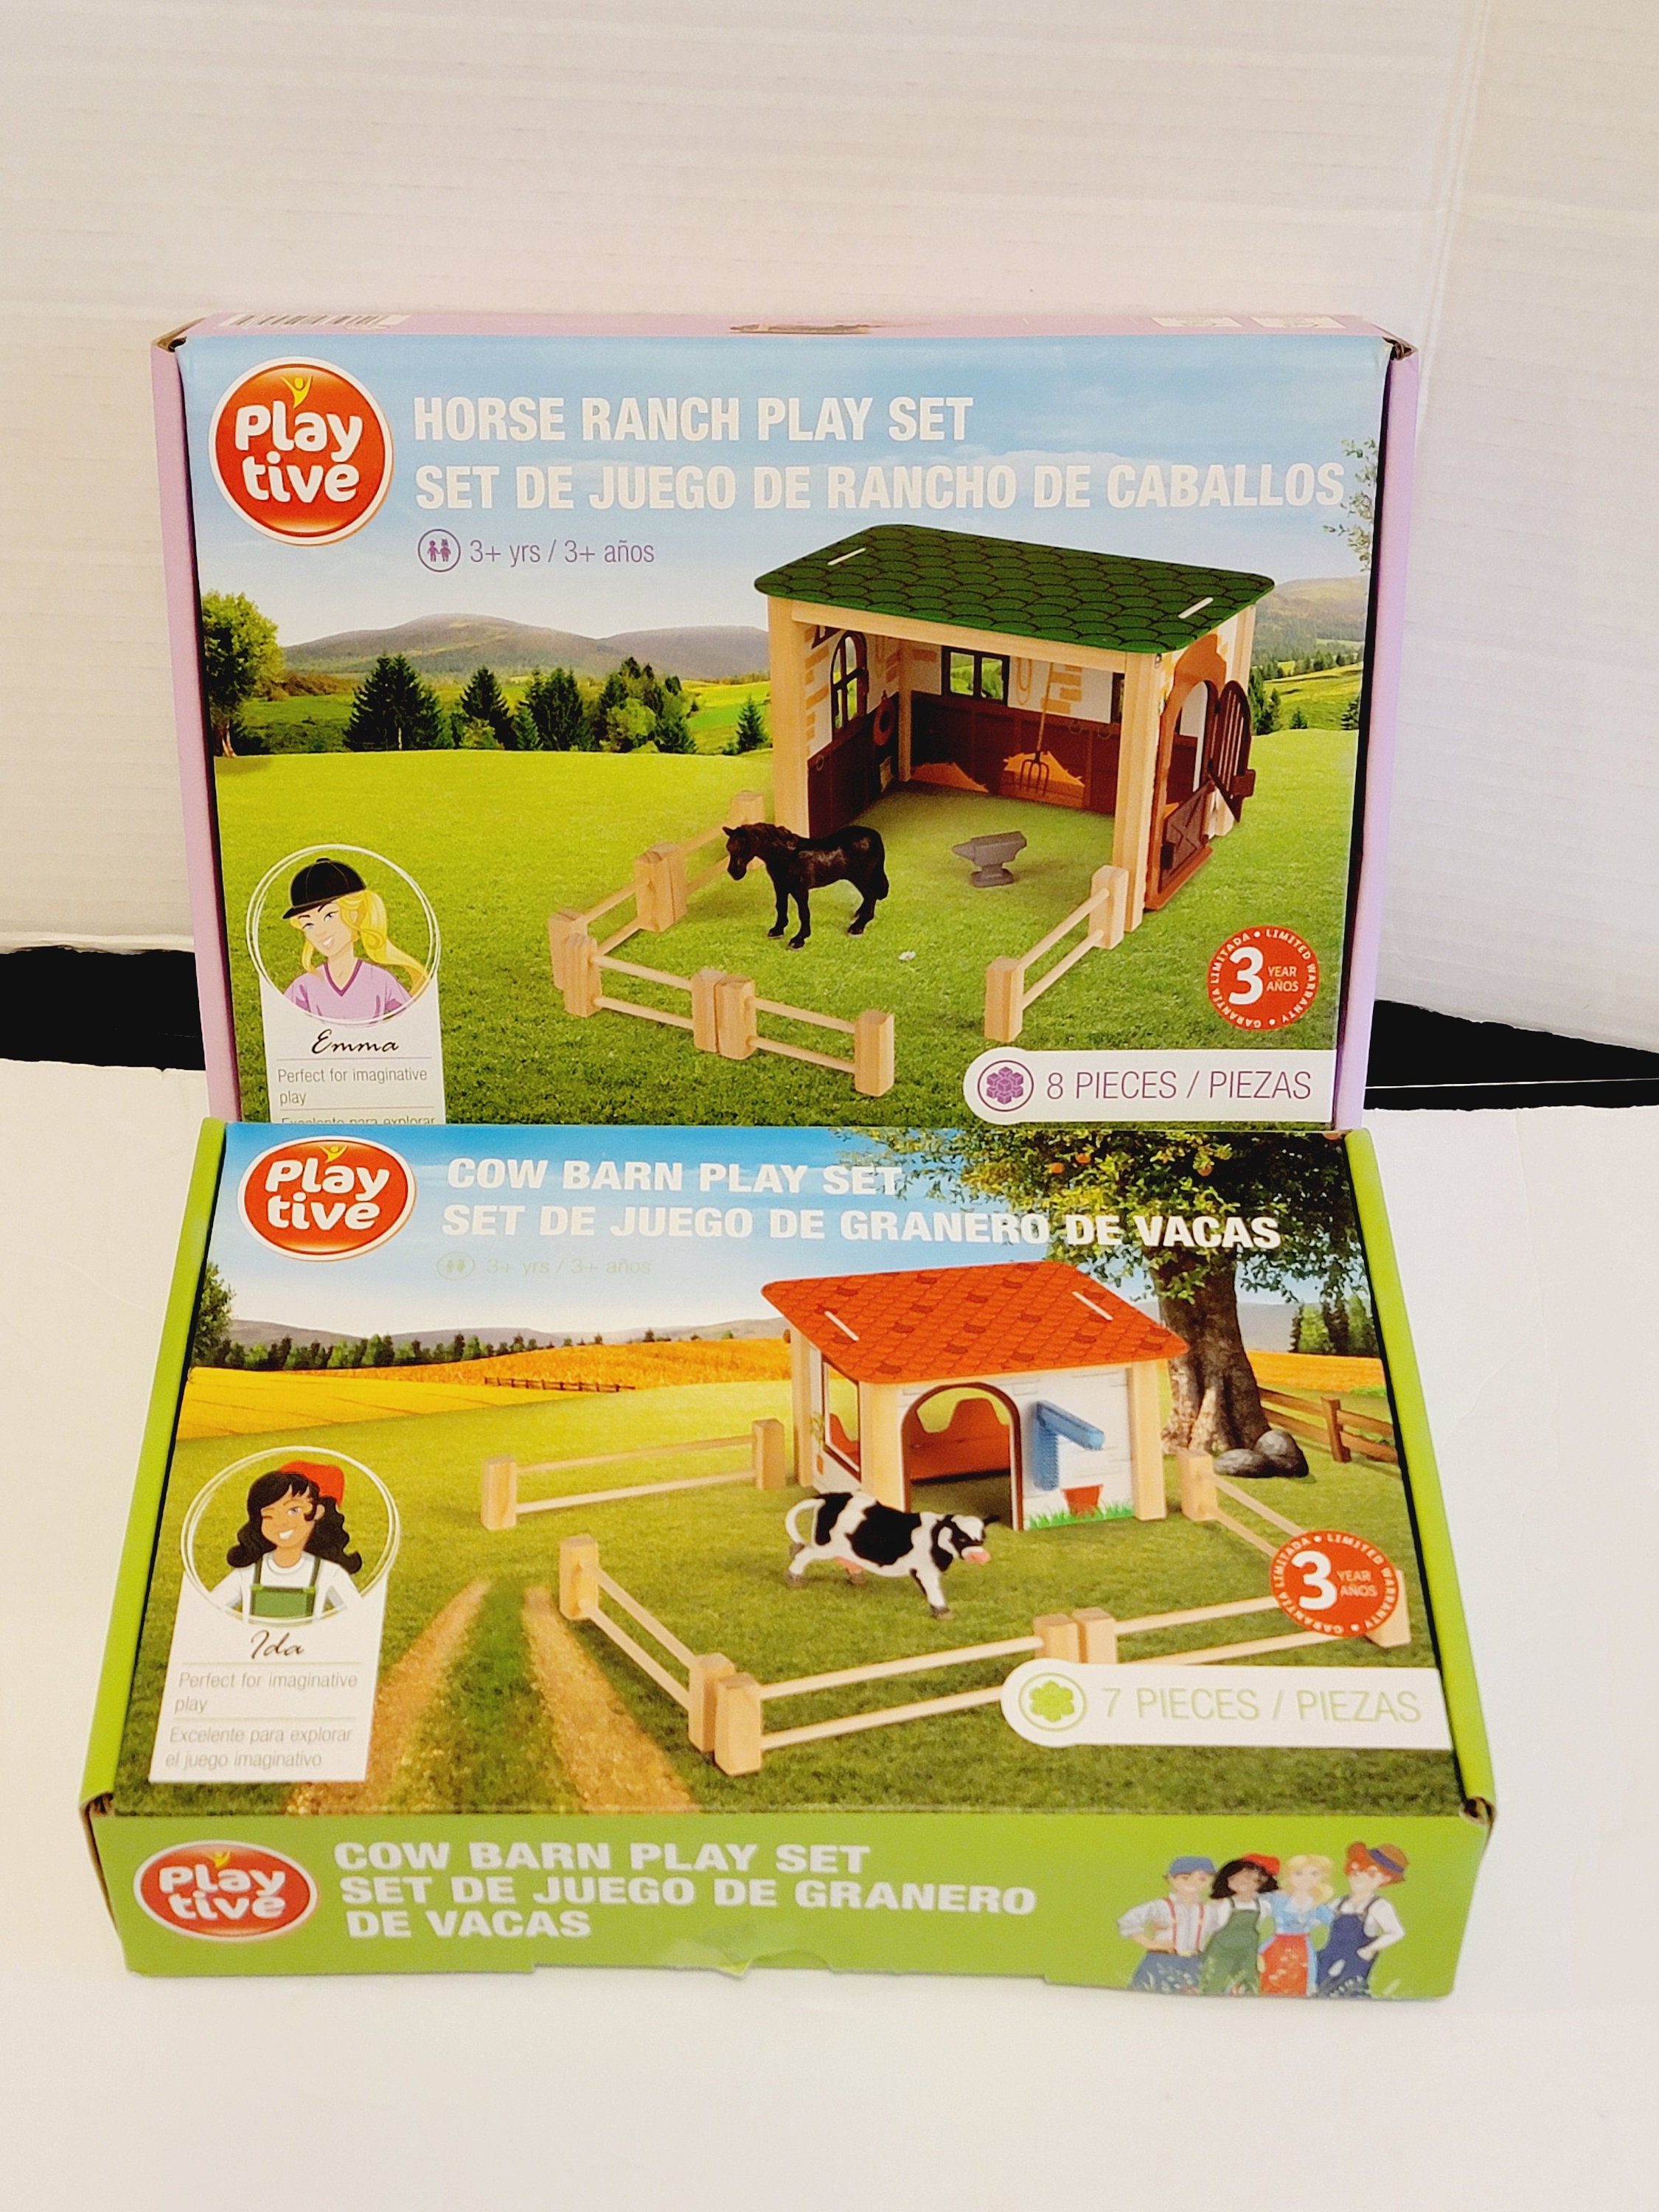 Playtive train  2 for sale in Ireland 